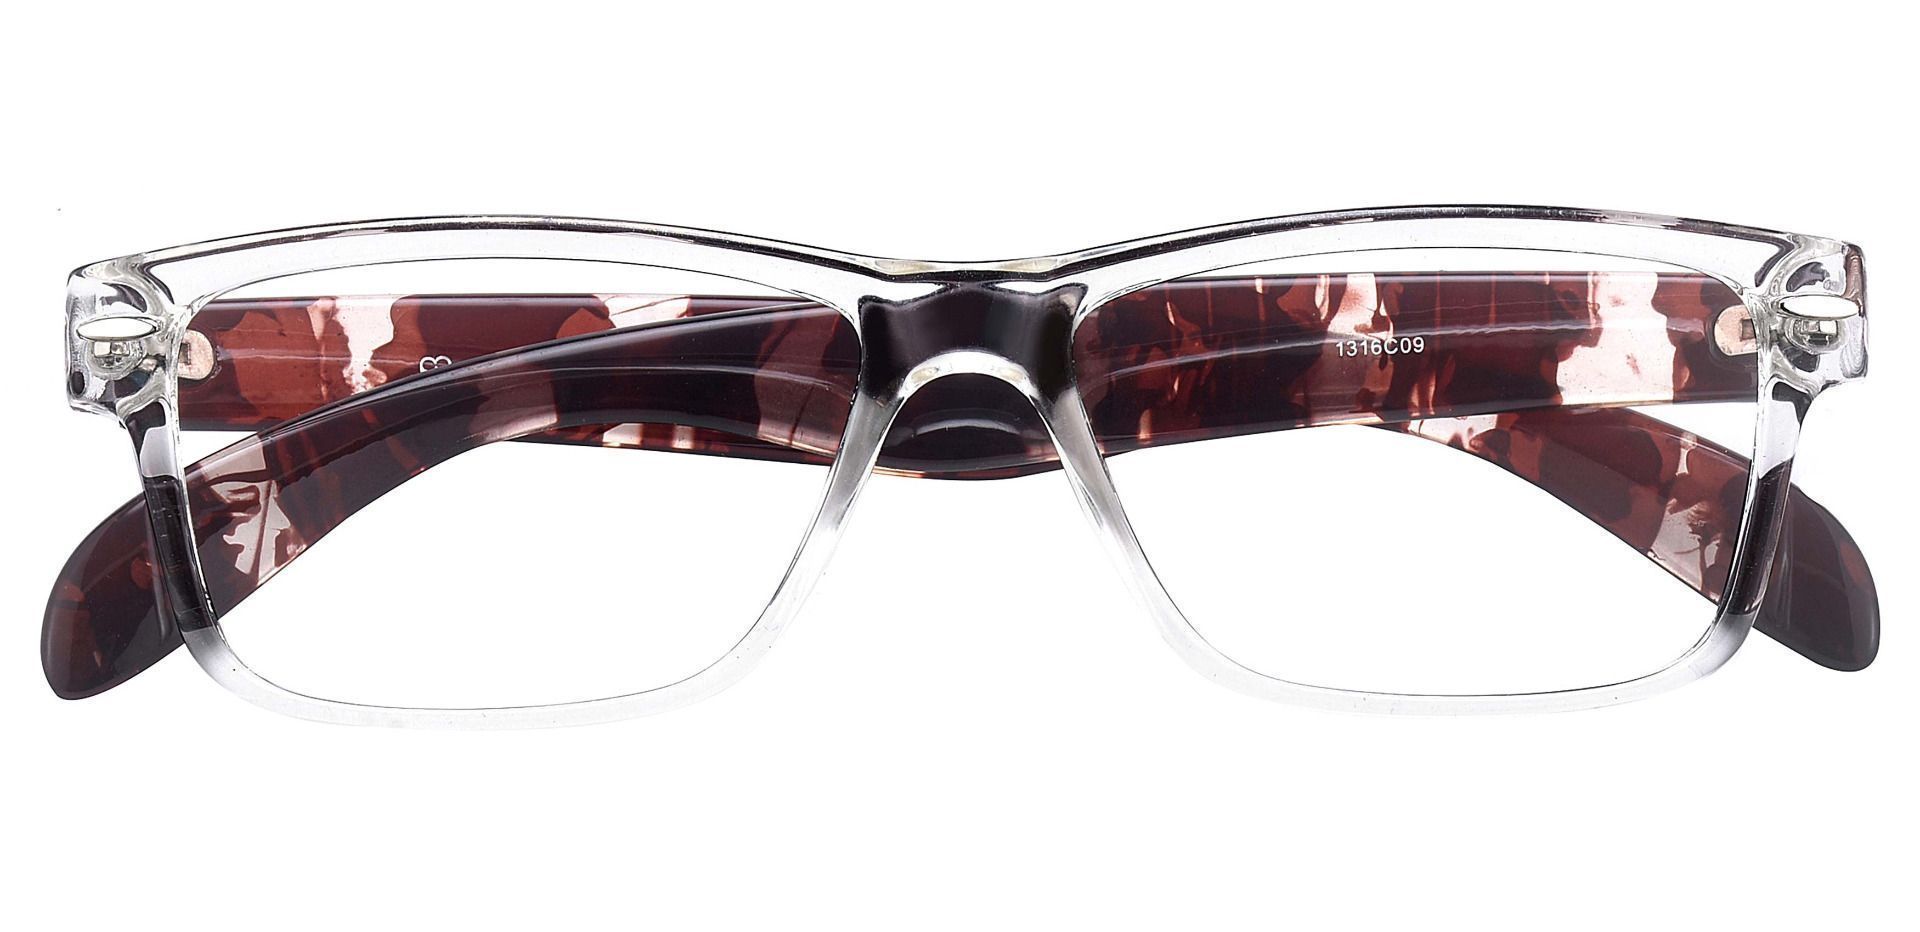 Tate Rectangle Progressive Glasses - The Frame Is Clear And Tortoise